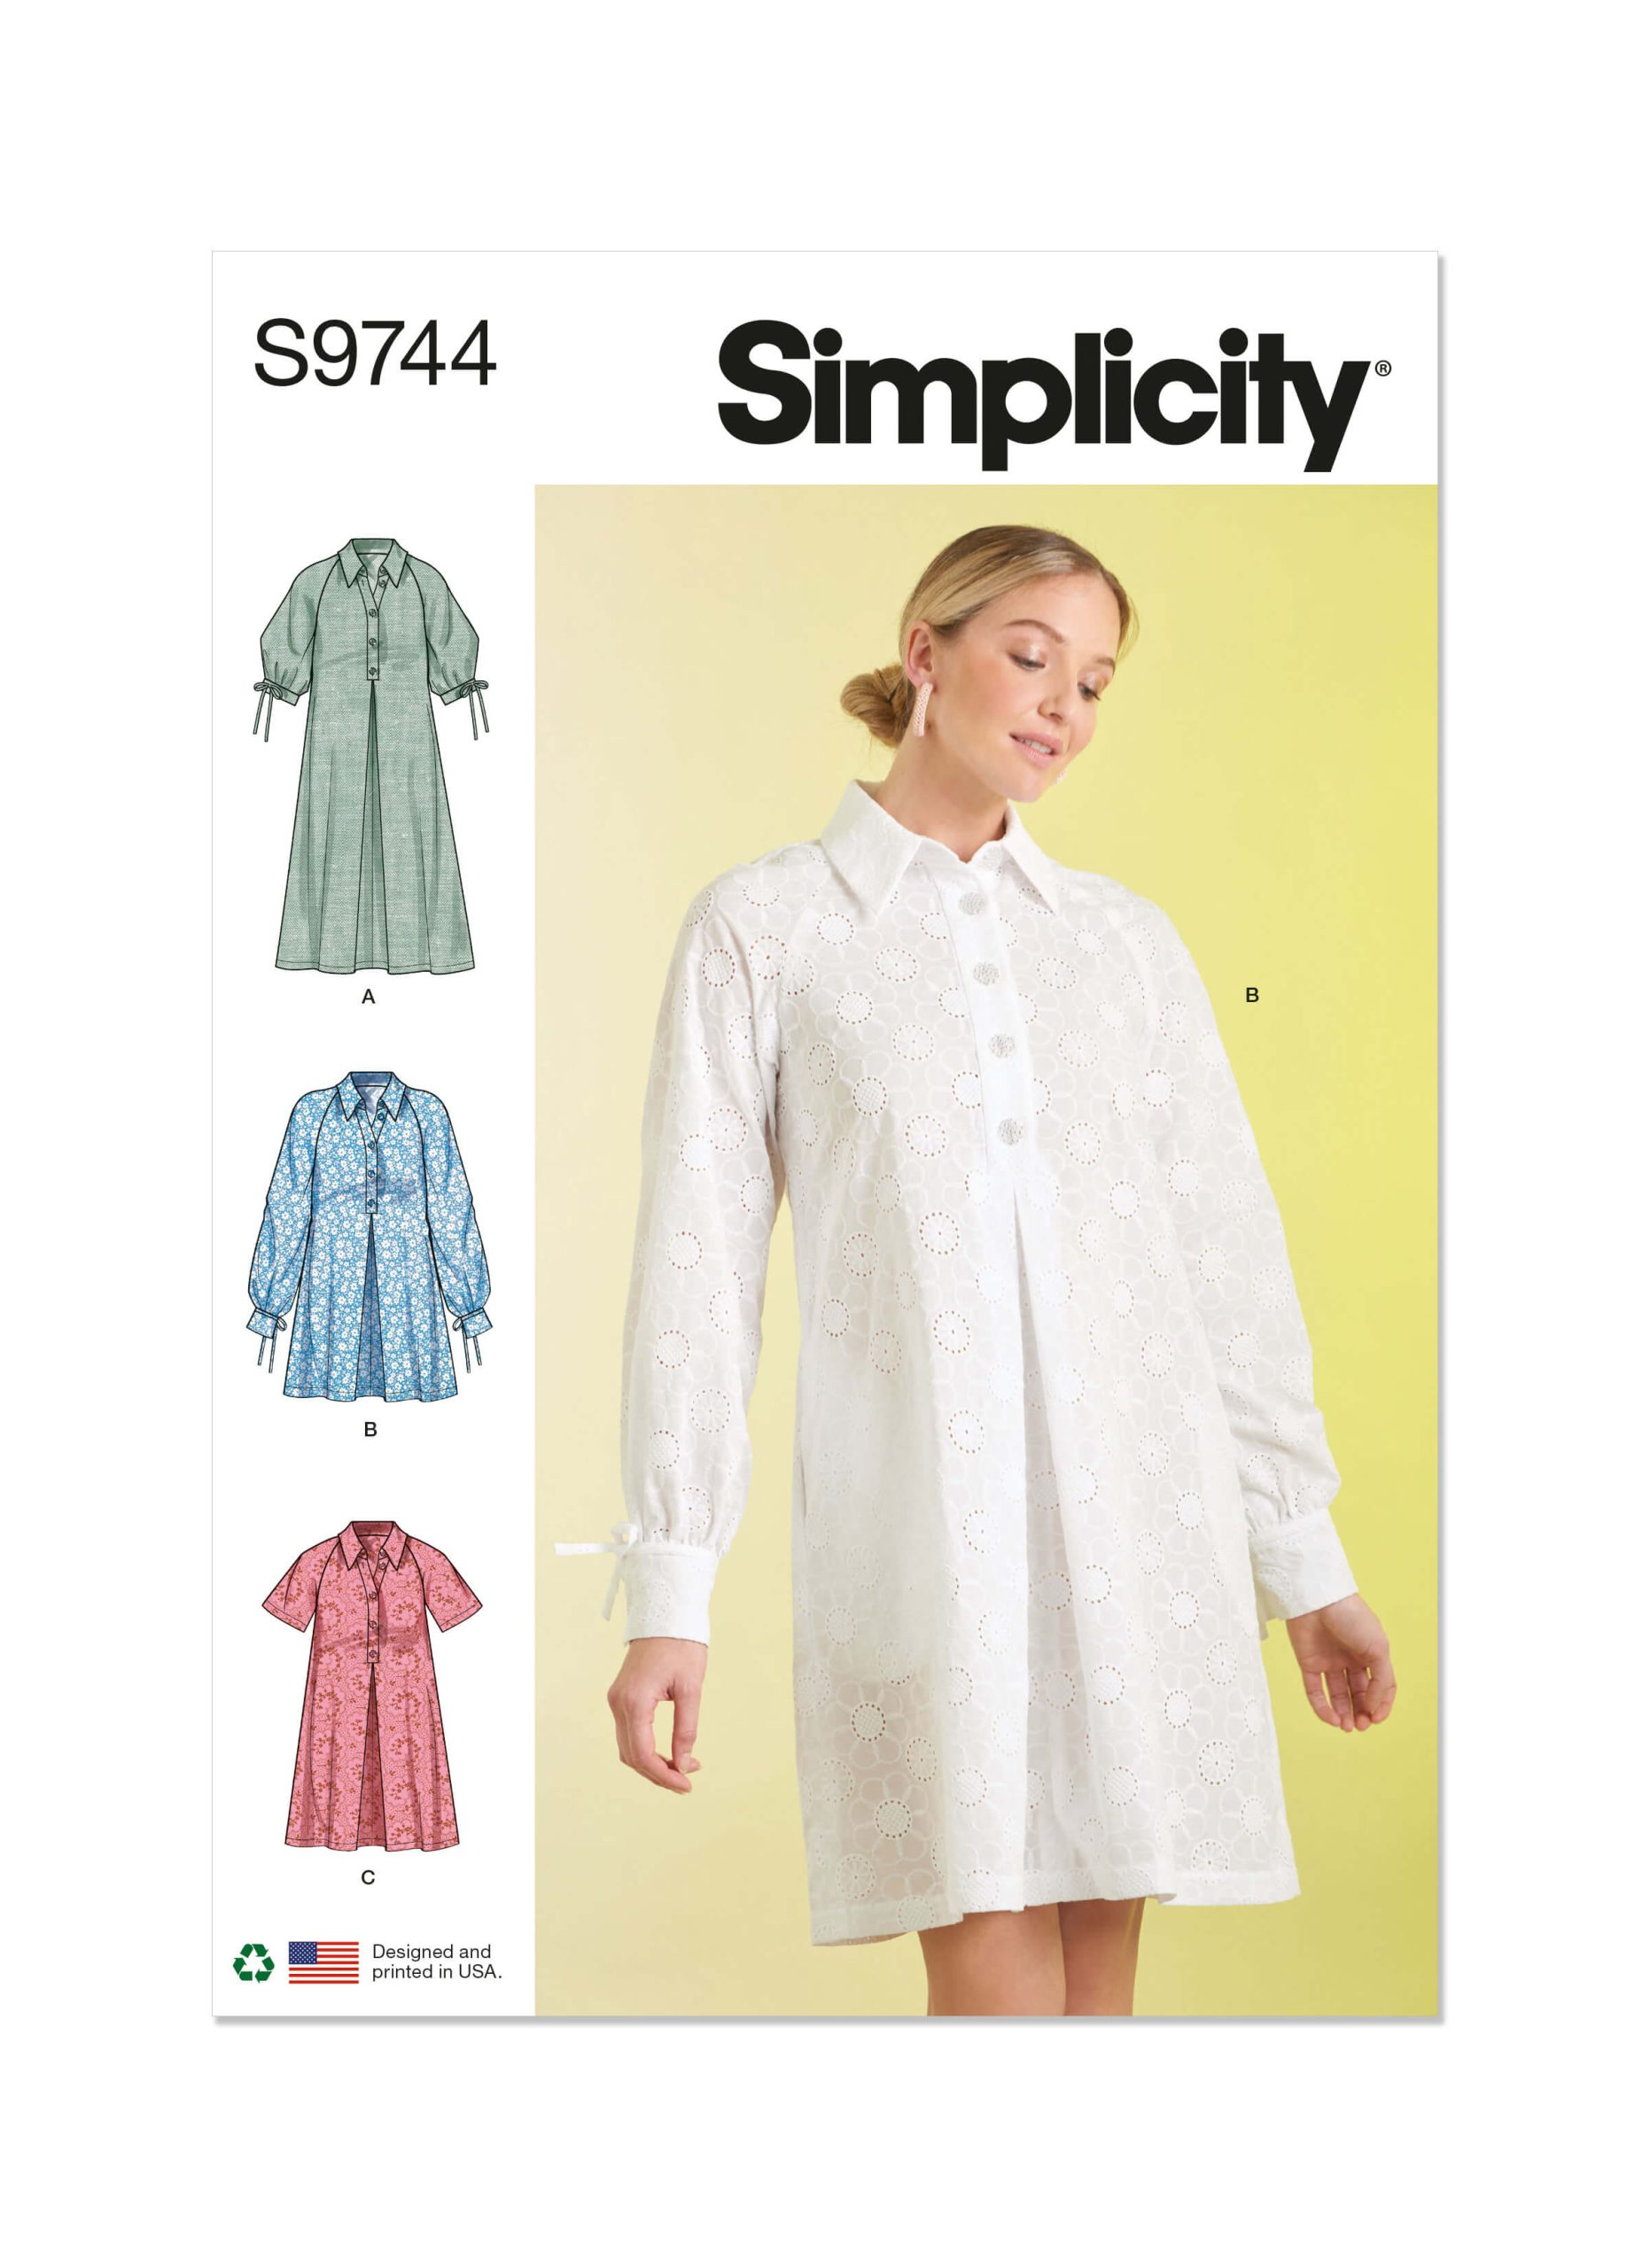 Simplicity Sewing Pattern S9744 Misses' Dresses